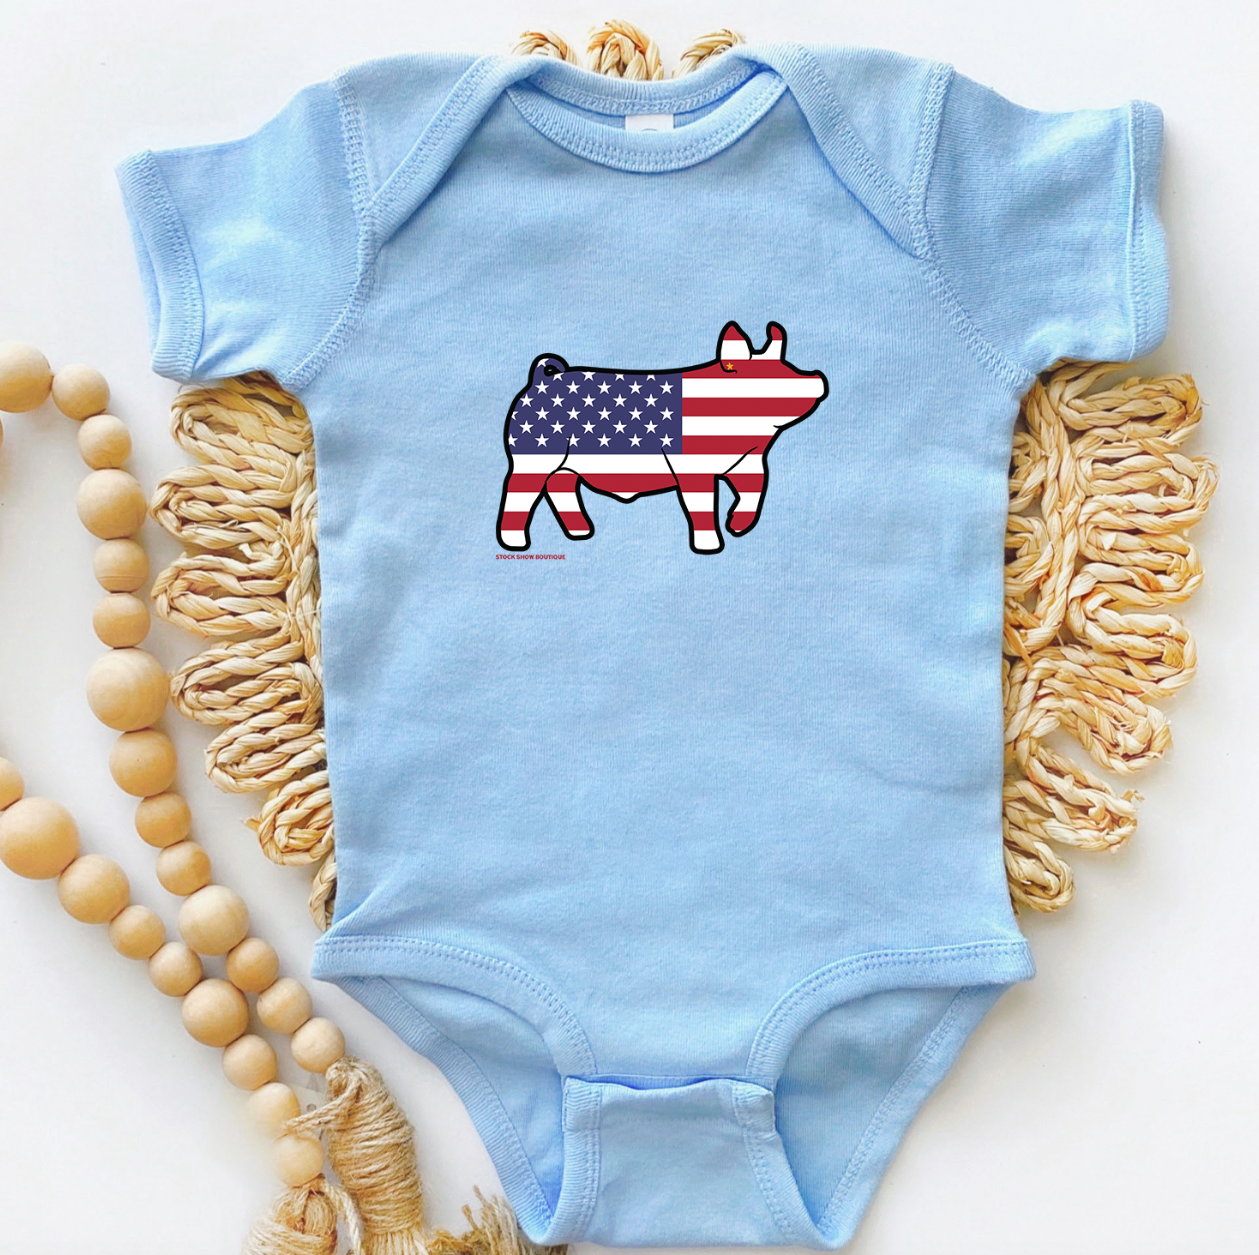 Patriotic Pig One Piece/T-Shirt (Newborn - Youth XL) - Multiple Colors!